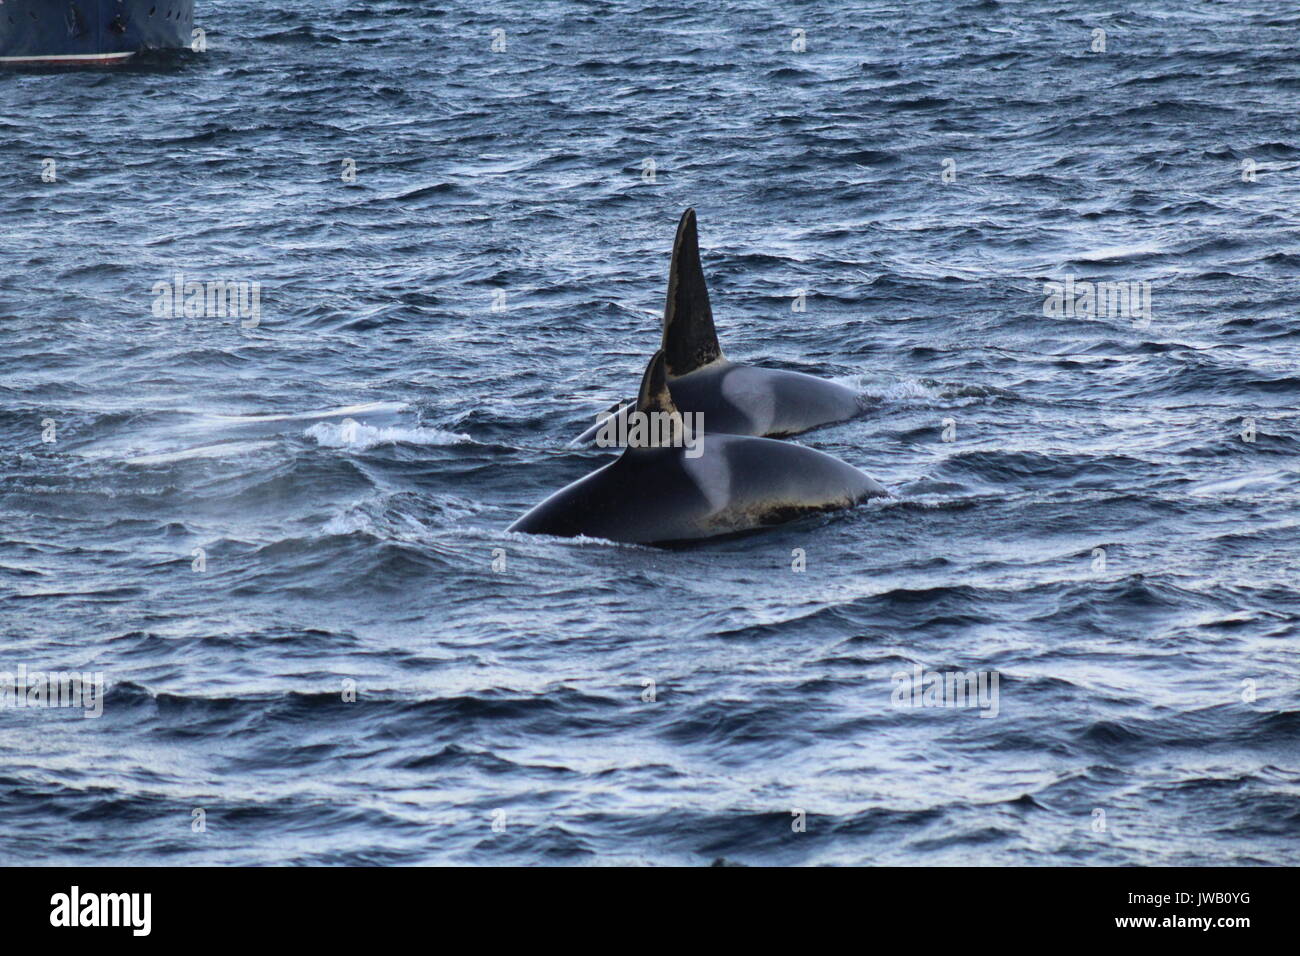 Surfaced orca whales swimming in fjord by mountains in Norway Stock Photo